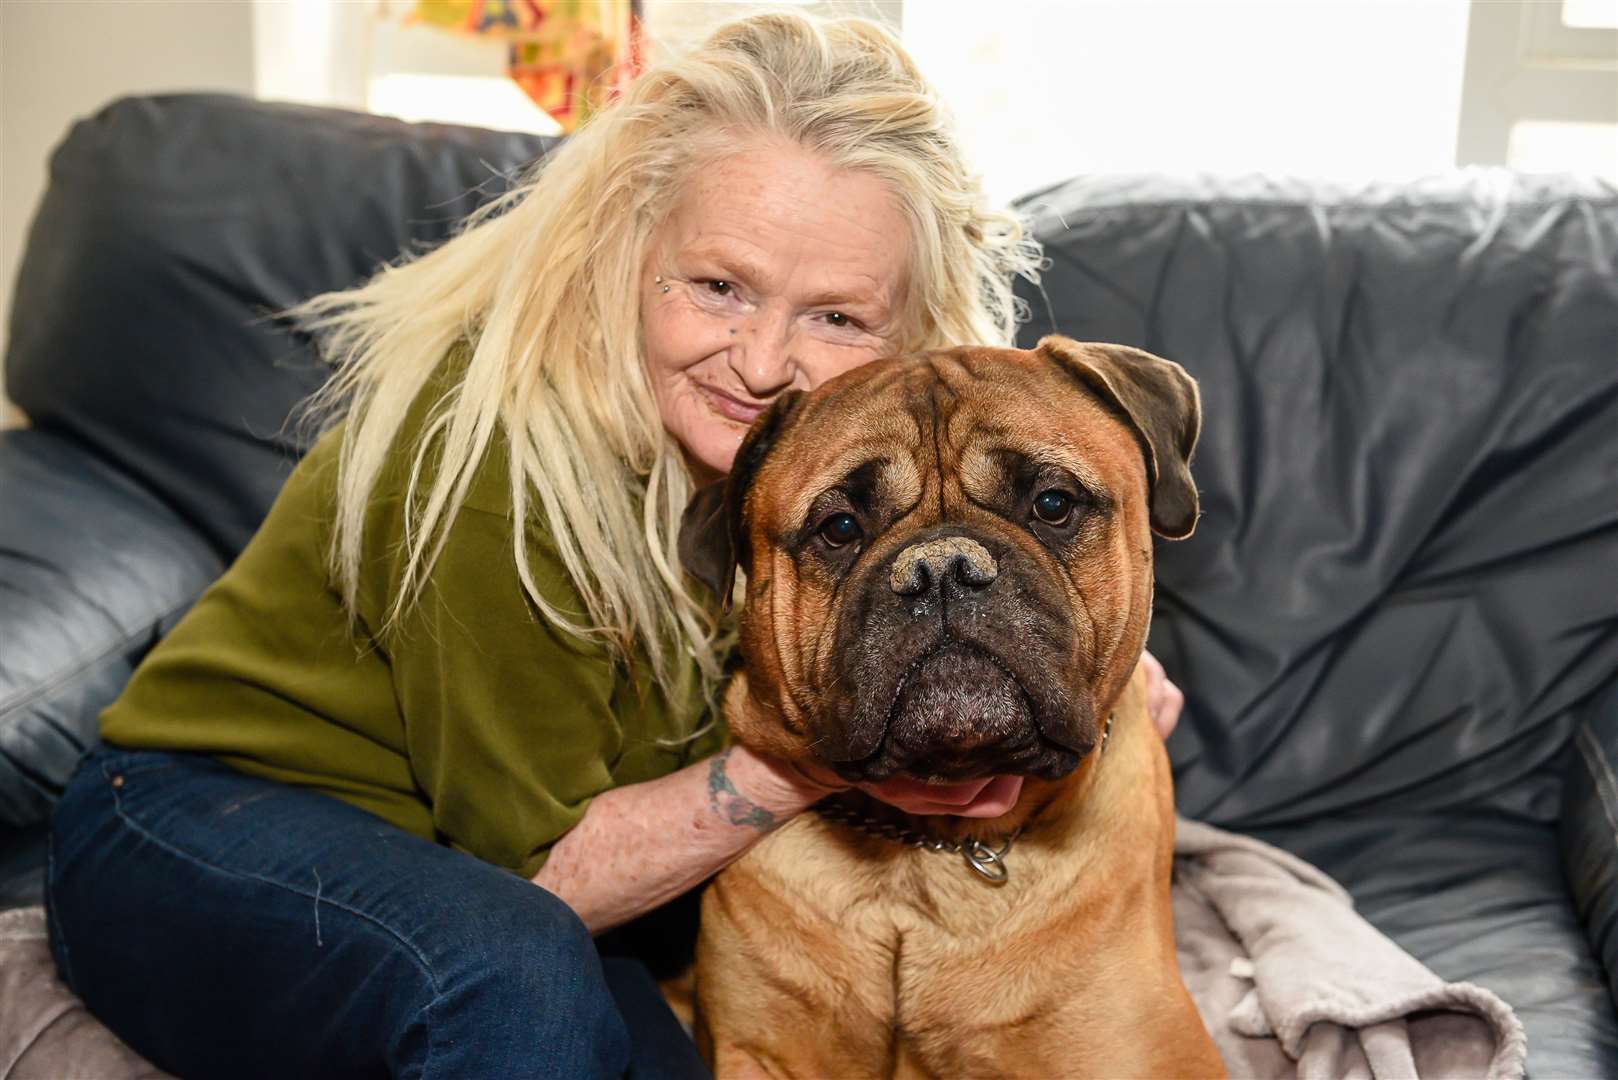 Mandy Waugh with her dog Ziggy. Pictures: Alan Langley